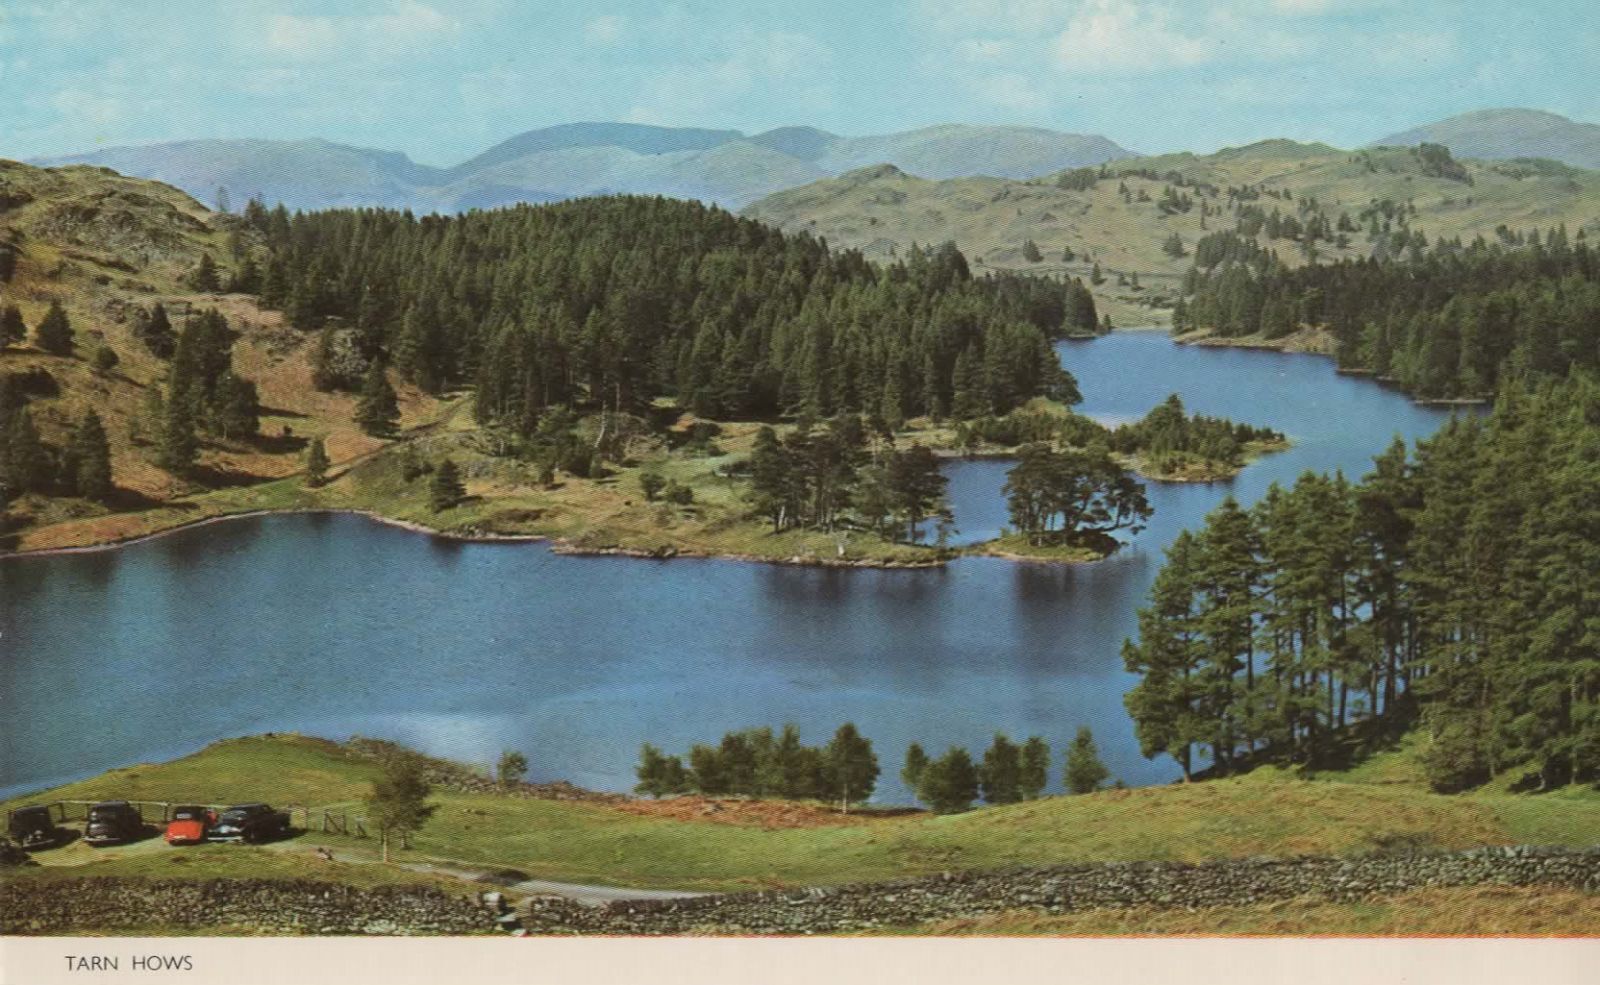 House Clearance - Lakeland Service "Tarn Hows" (Unused) Published by Cotman-Color